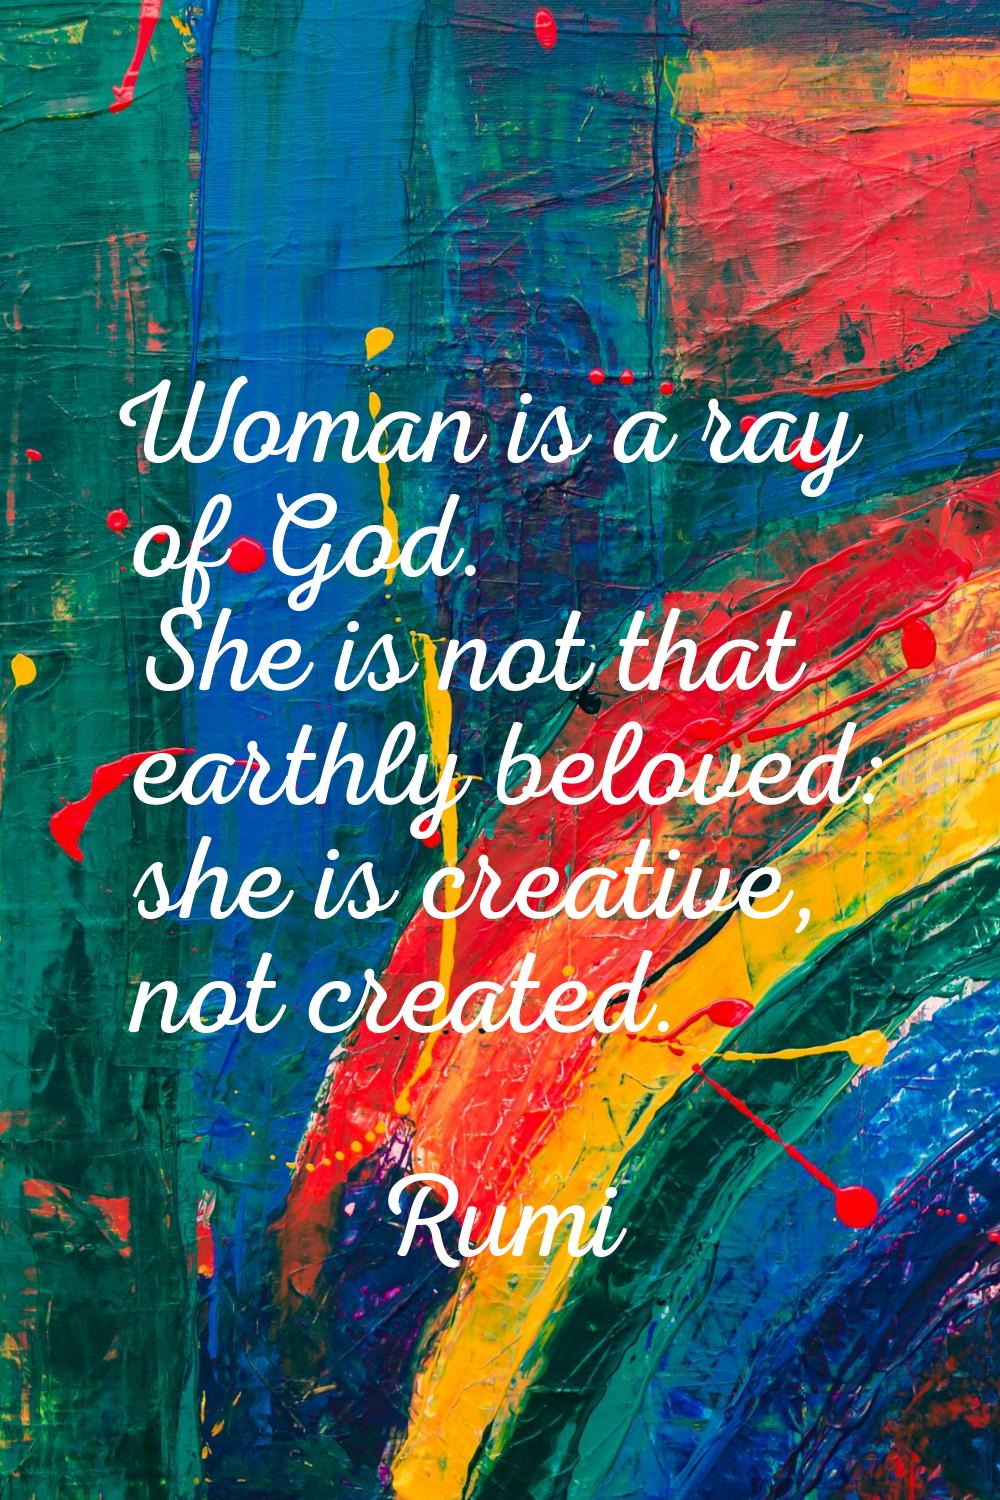 Woman is a ray of God. She is not that earthly beloved: she is creative, not created.